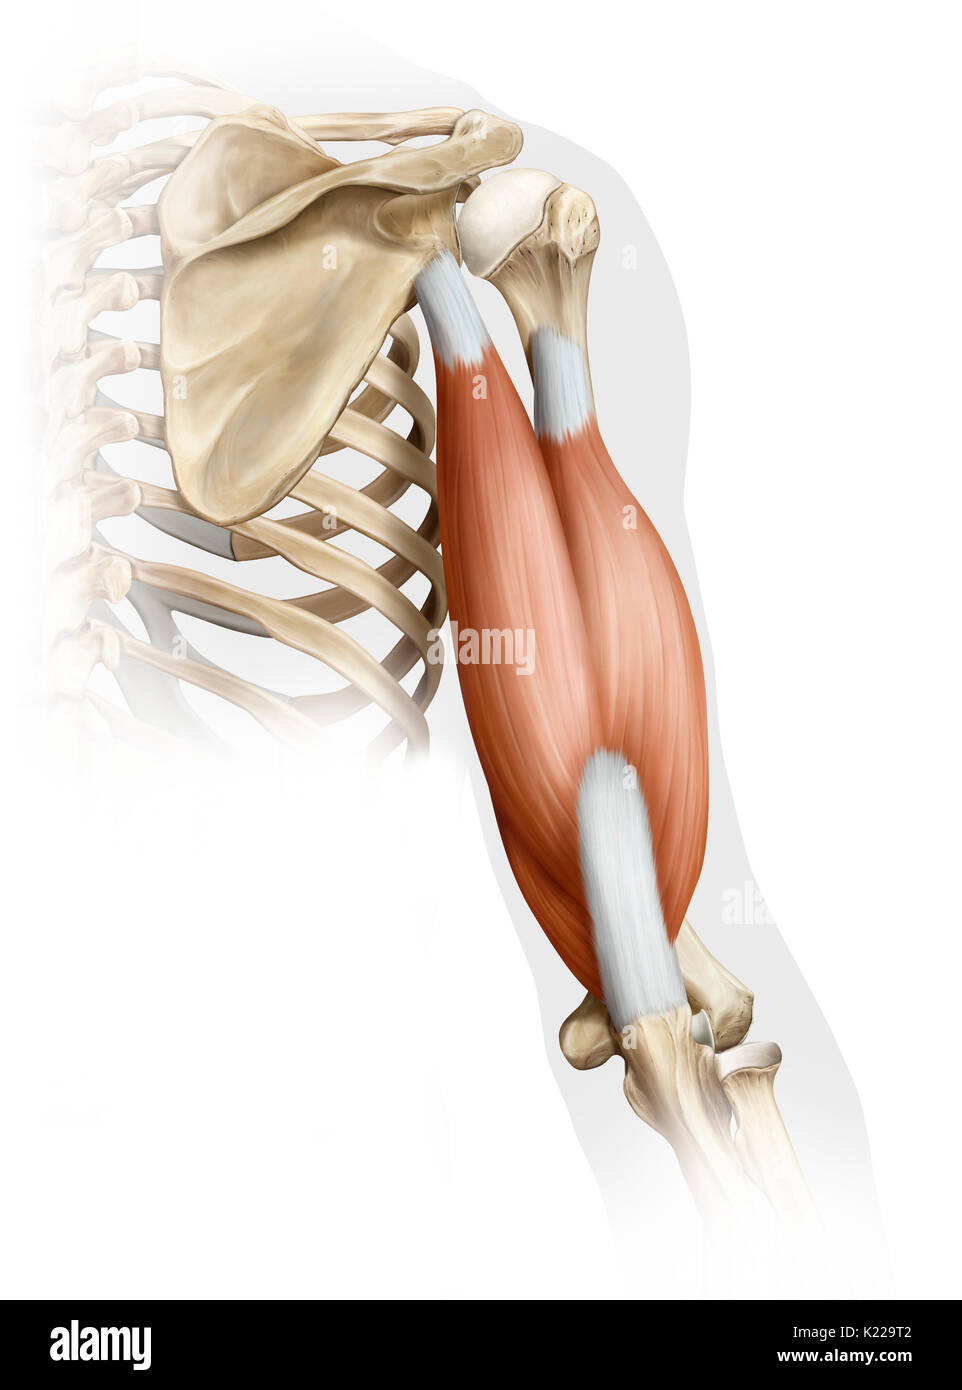 Powerful muscle that allows the forearm to extend at the elbow; it relaxes at the same time that the biceps muscle contracts. Stock Photo